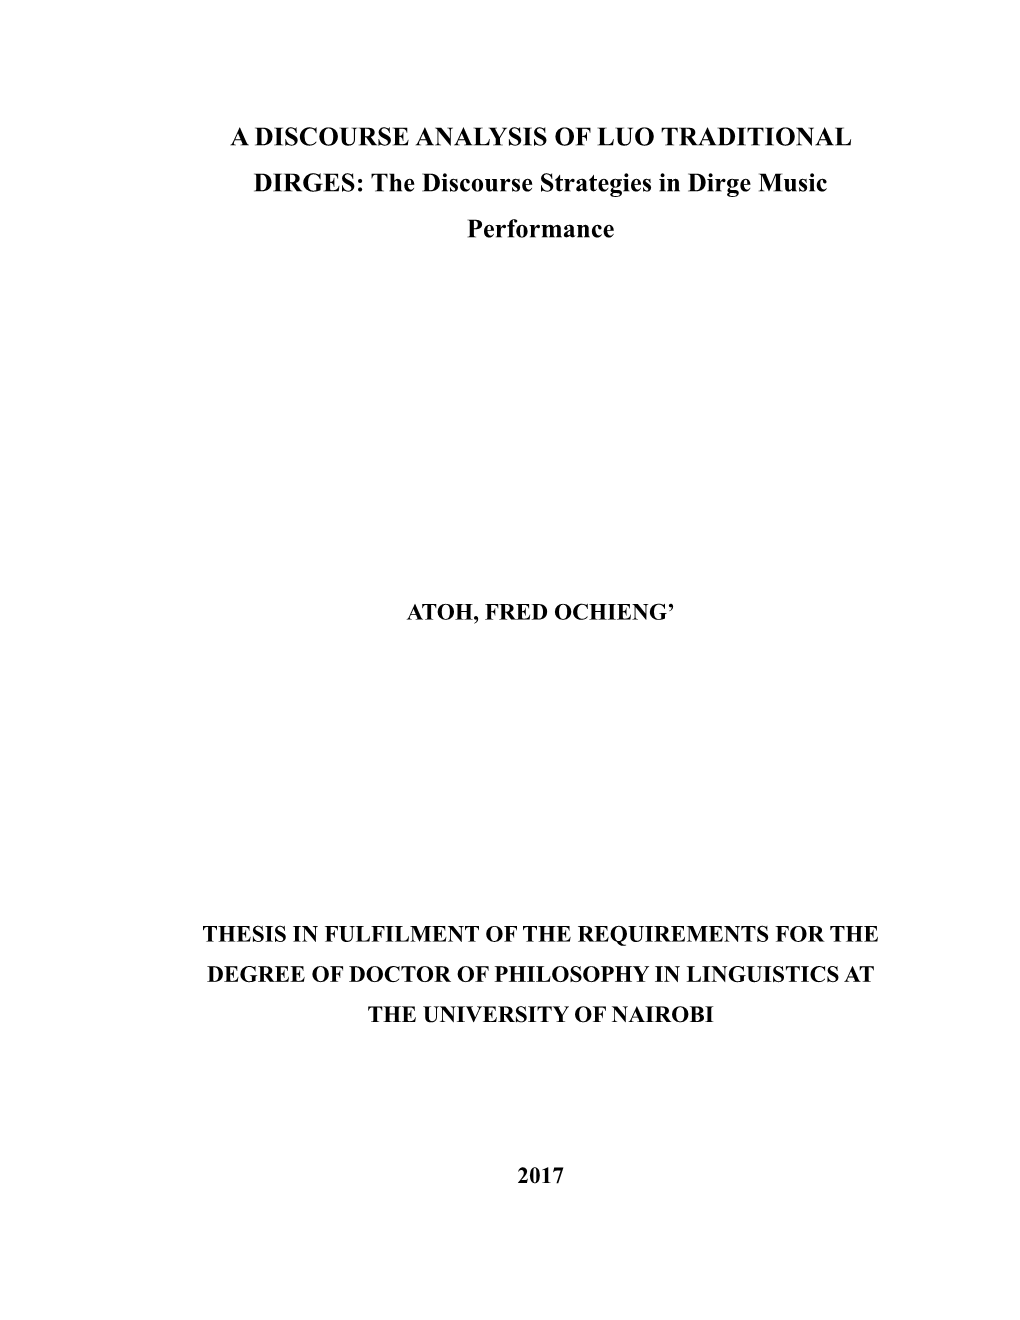 A DISCOURSE ANALYSIS of LUO TRADITIONAL DIRGES: the Discourse Strategies in Dirge Music Performance